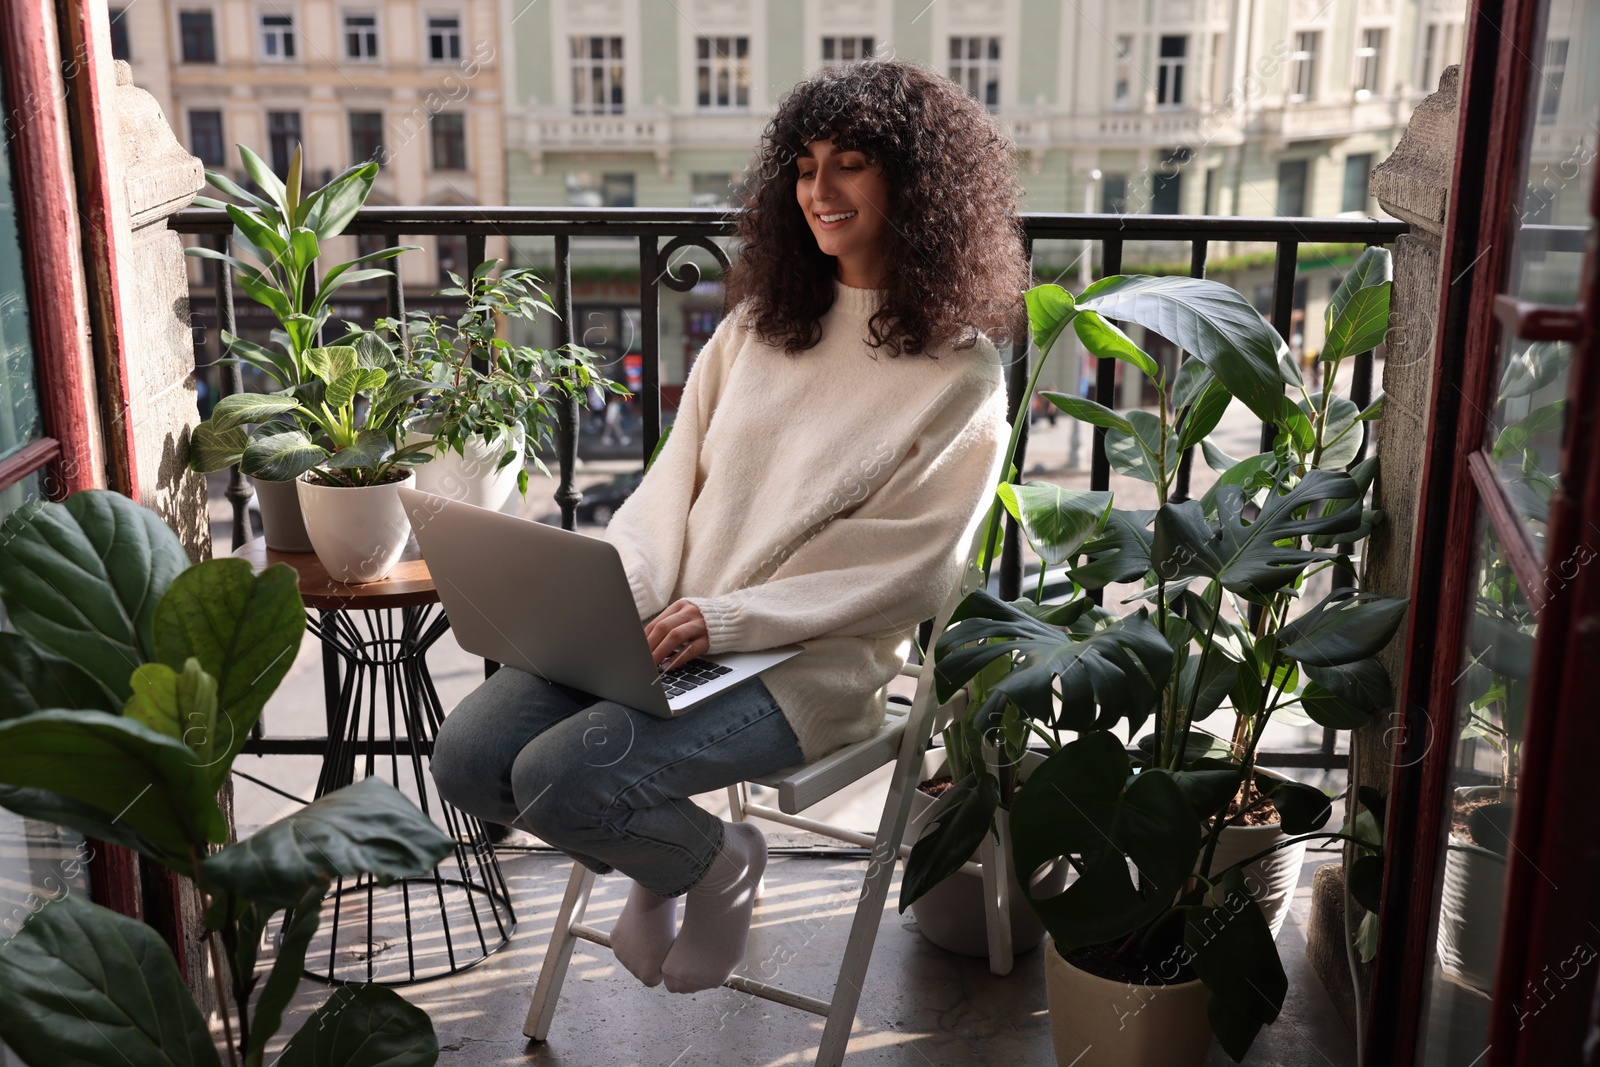 Photo of Beautiful young woman using laptop surrounded by green houseplants on balcony